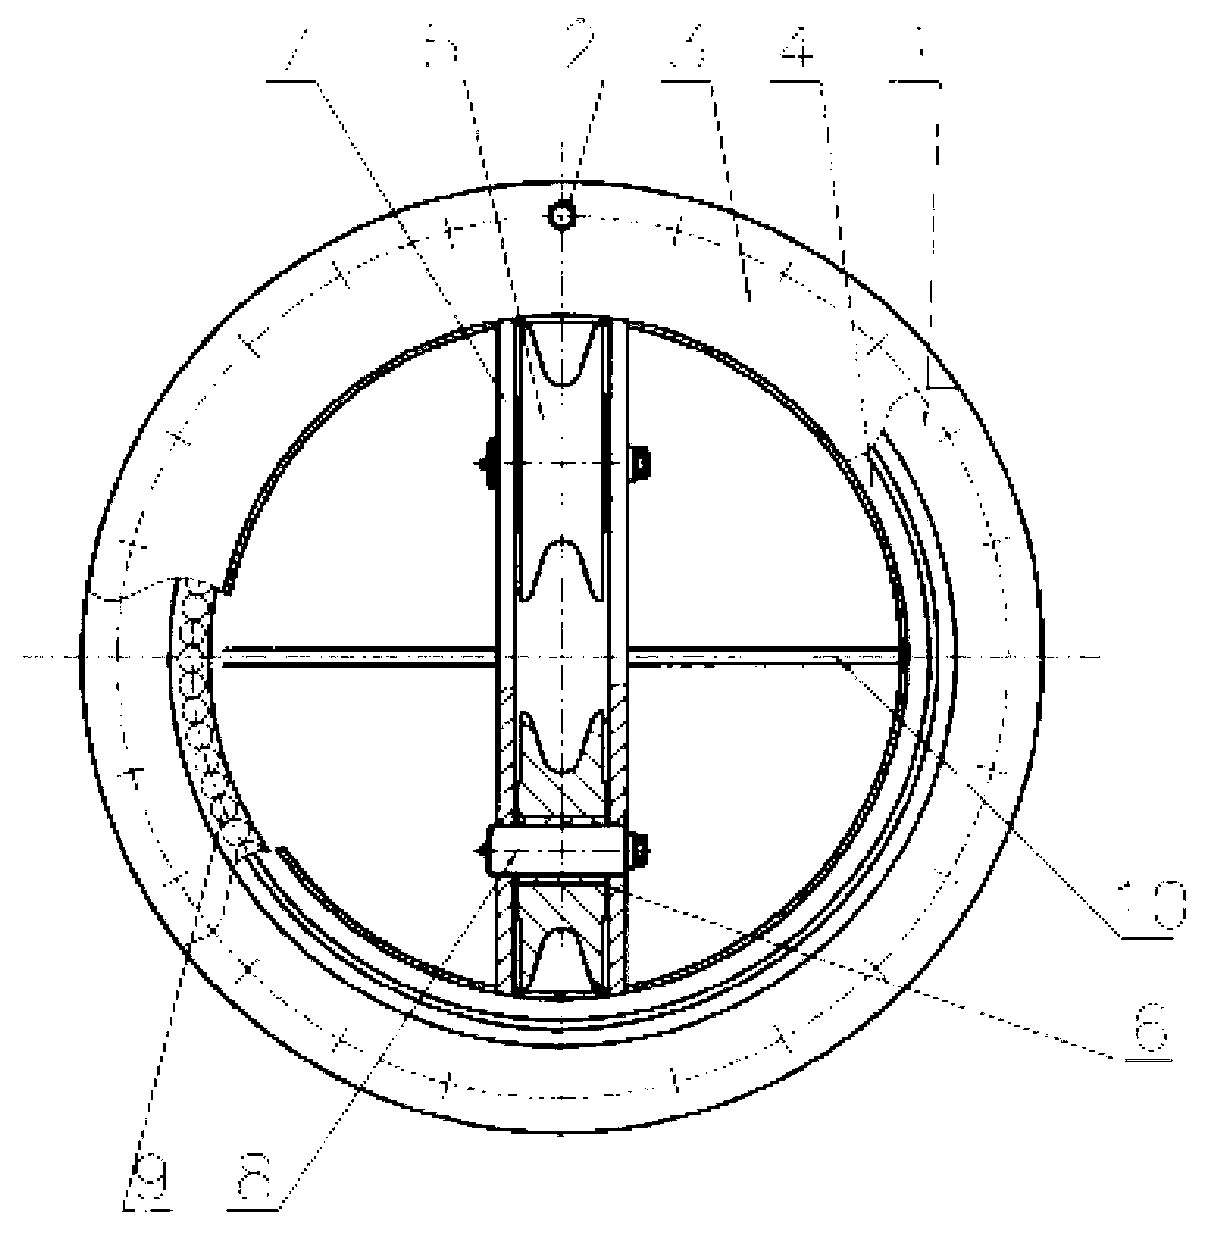 Mooring rope reeling and unreeling guiding device